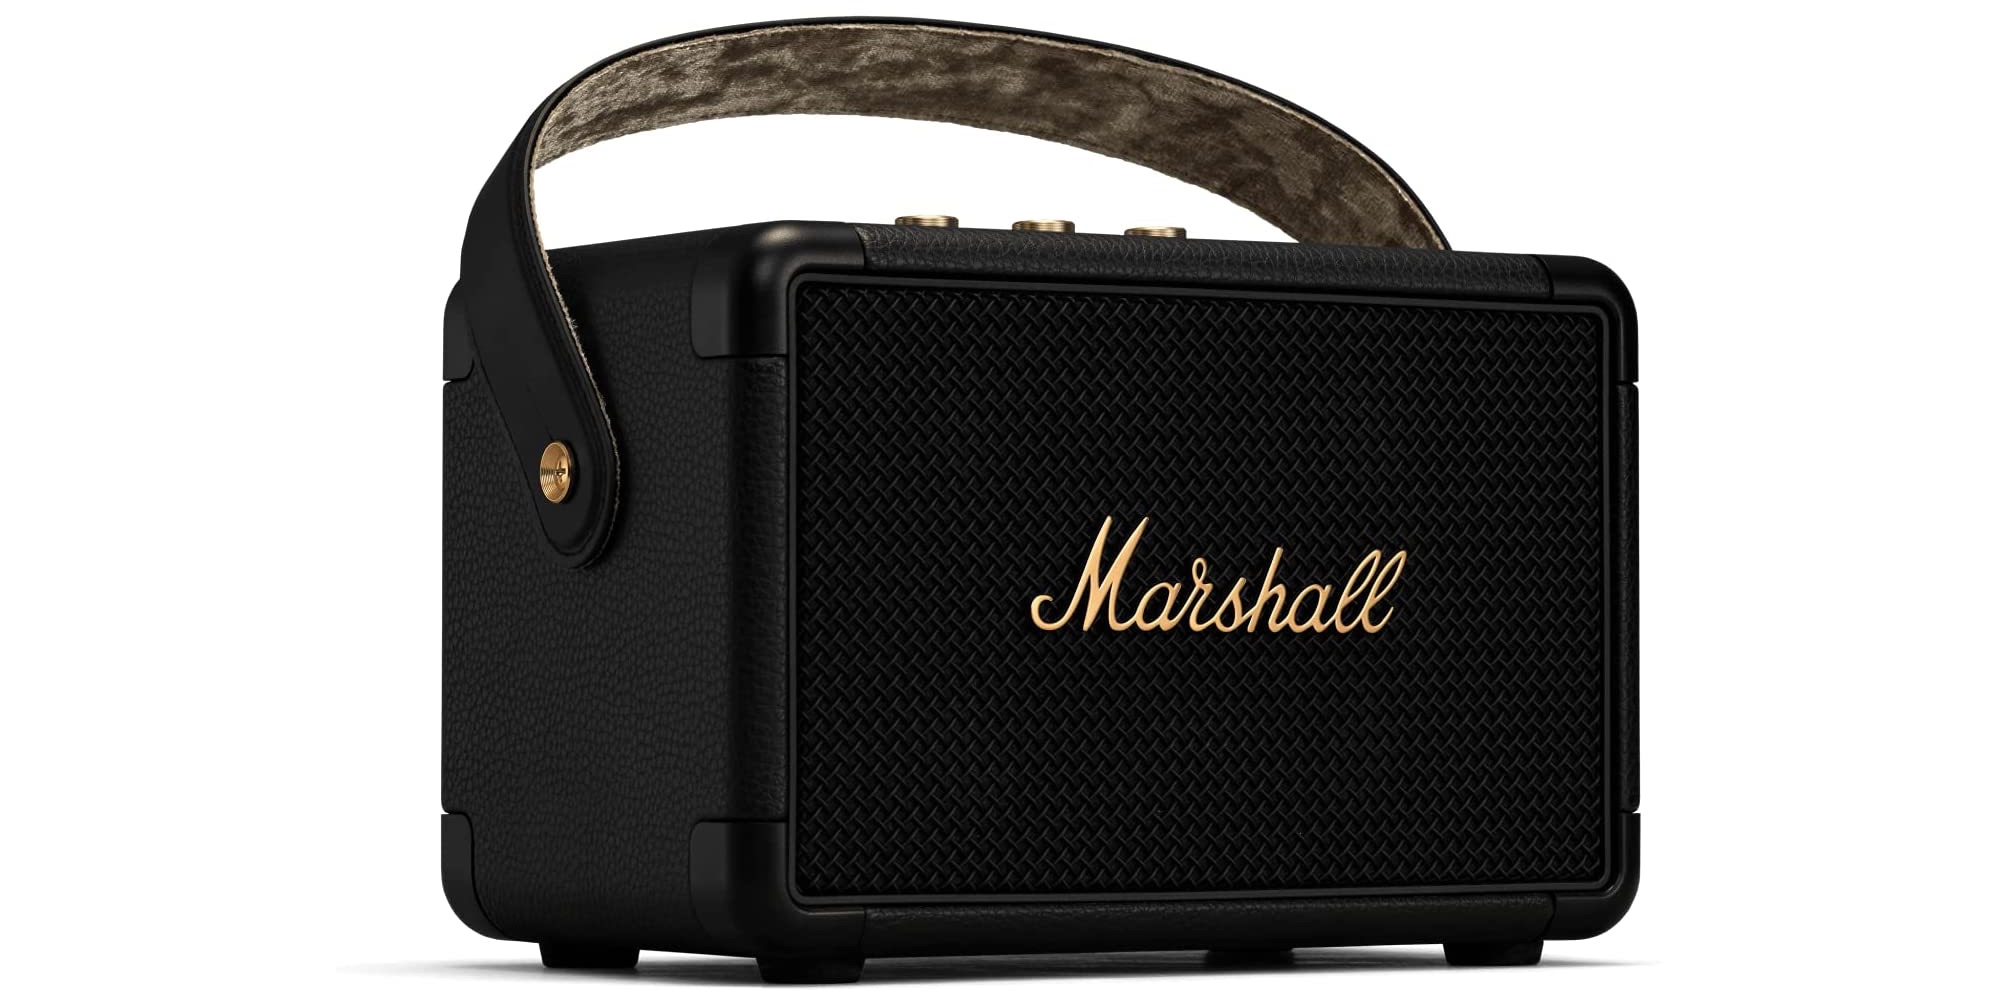 popular from on portable vinyl-wrapped Bluetooth sale $130 speakers Marshall\'s